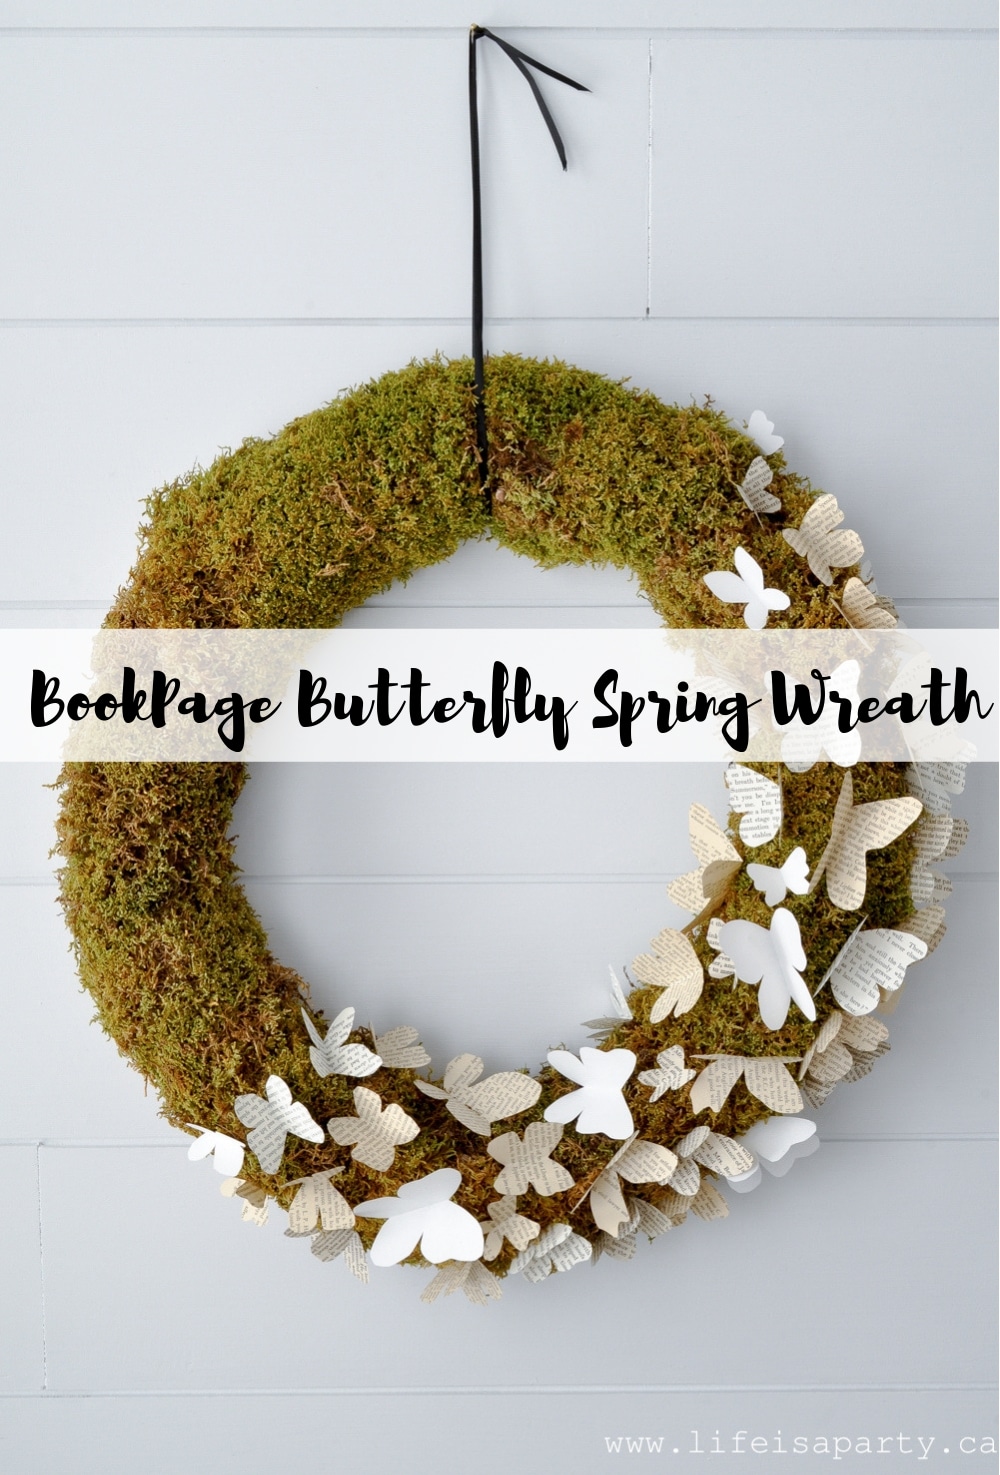 BookPage Butterfly Spring Wreath